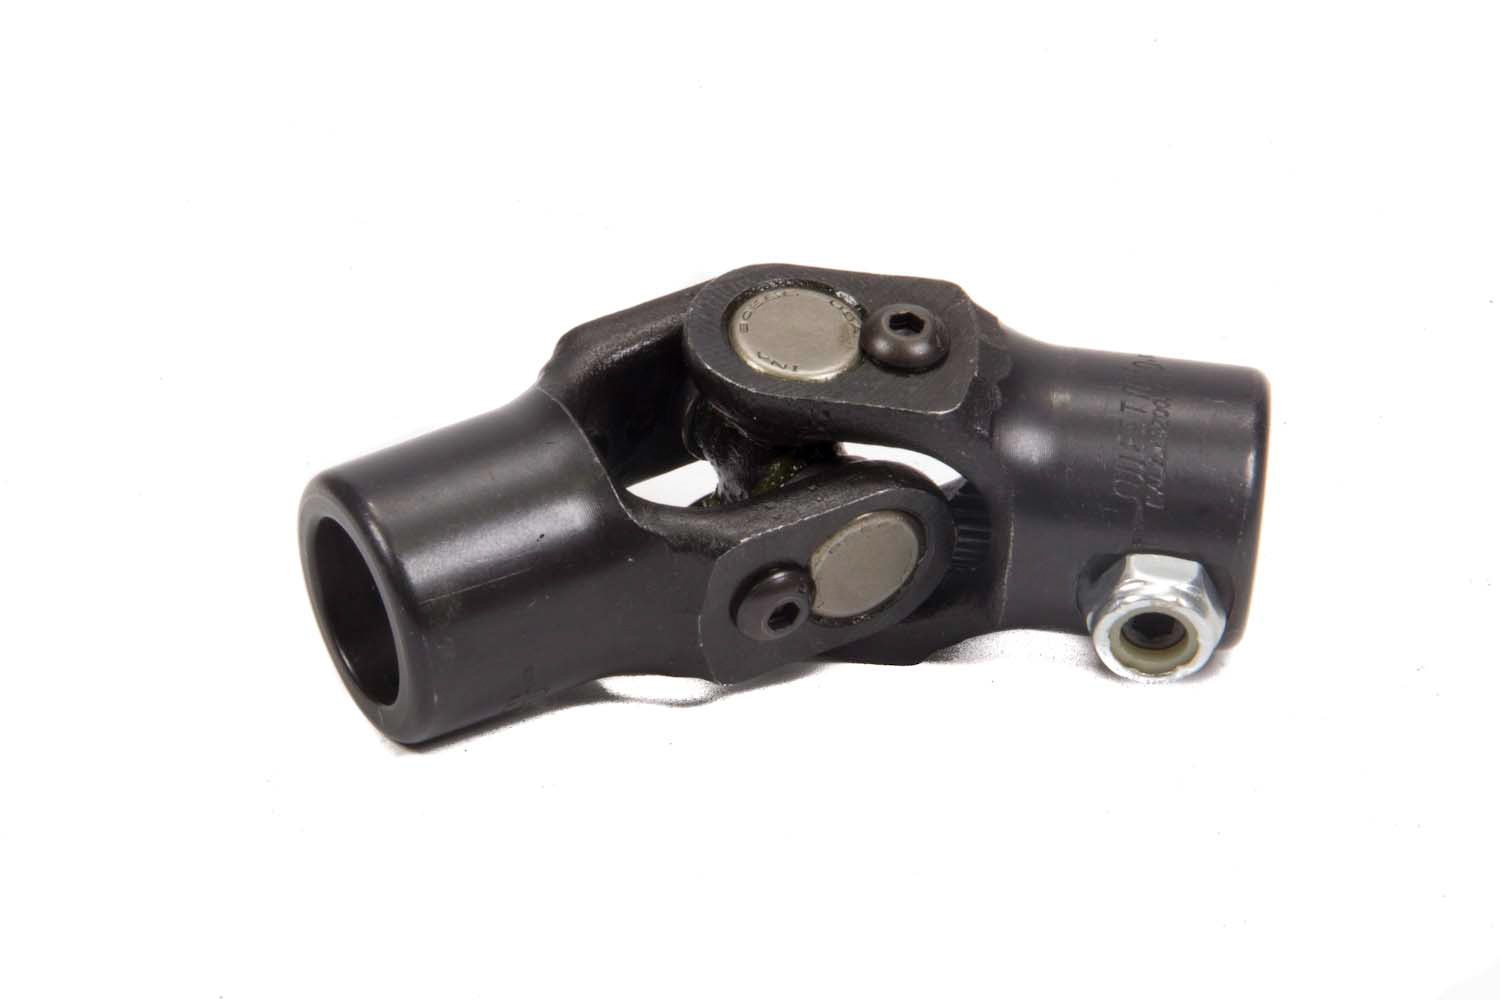 Sweet Manufacturing 401-51419 Steering Universal Joint, Single Joint, 5/8 in 36 Spline to 3/4 in Double D, Steel, Black Paint, Each